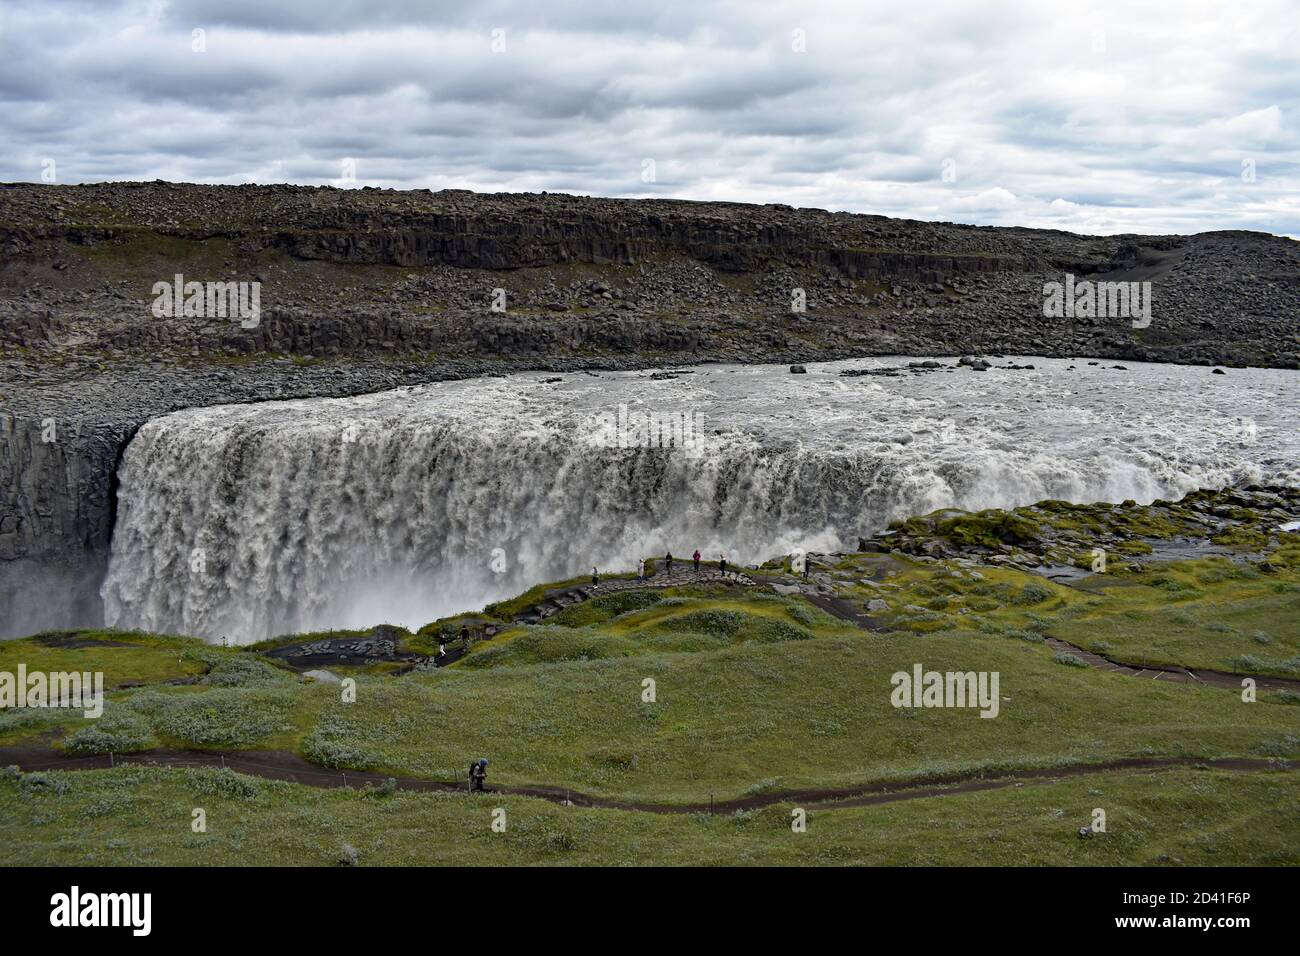 Dettifoss Waterfall in Northeast Iceland. Visitors and tourists can be seen wondering along the path that follows the rim of Jokulsargljufur Canyon. Stock Photo